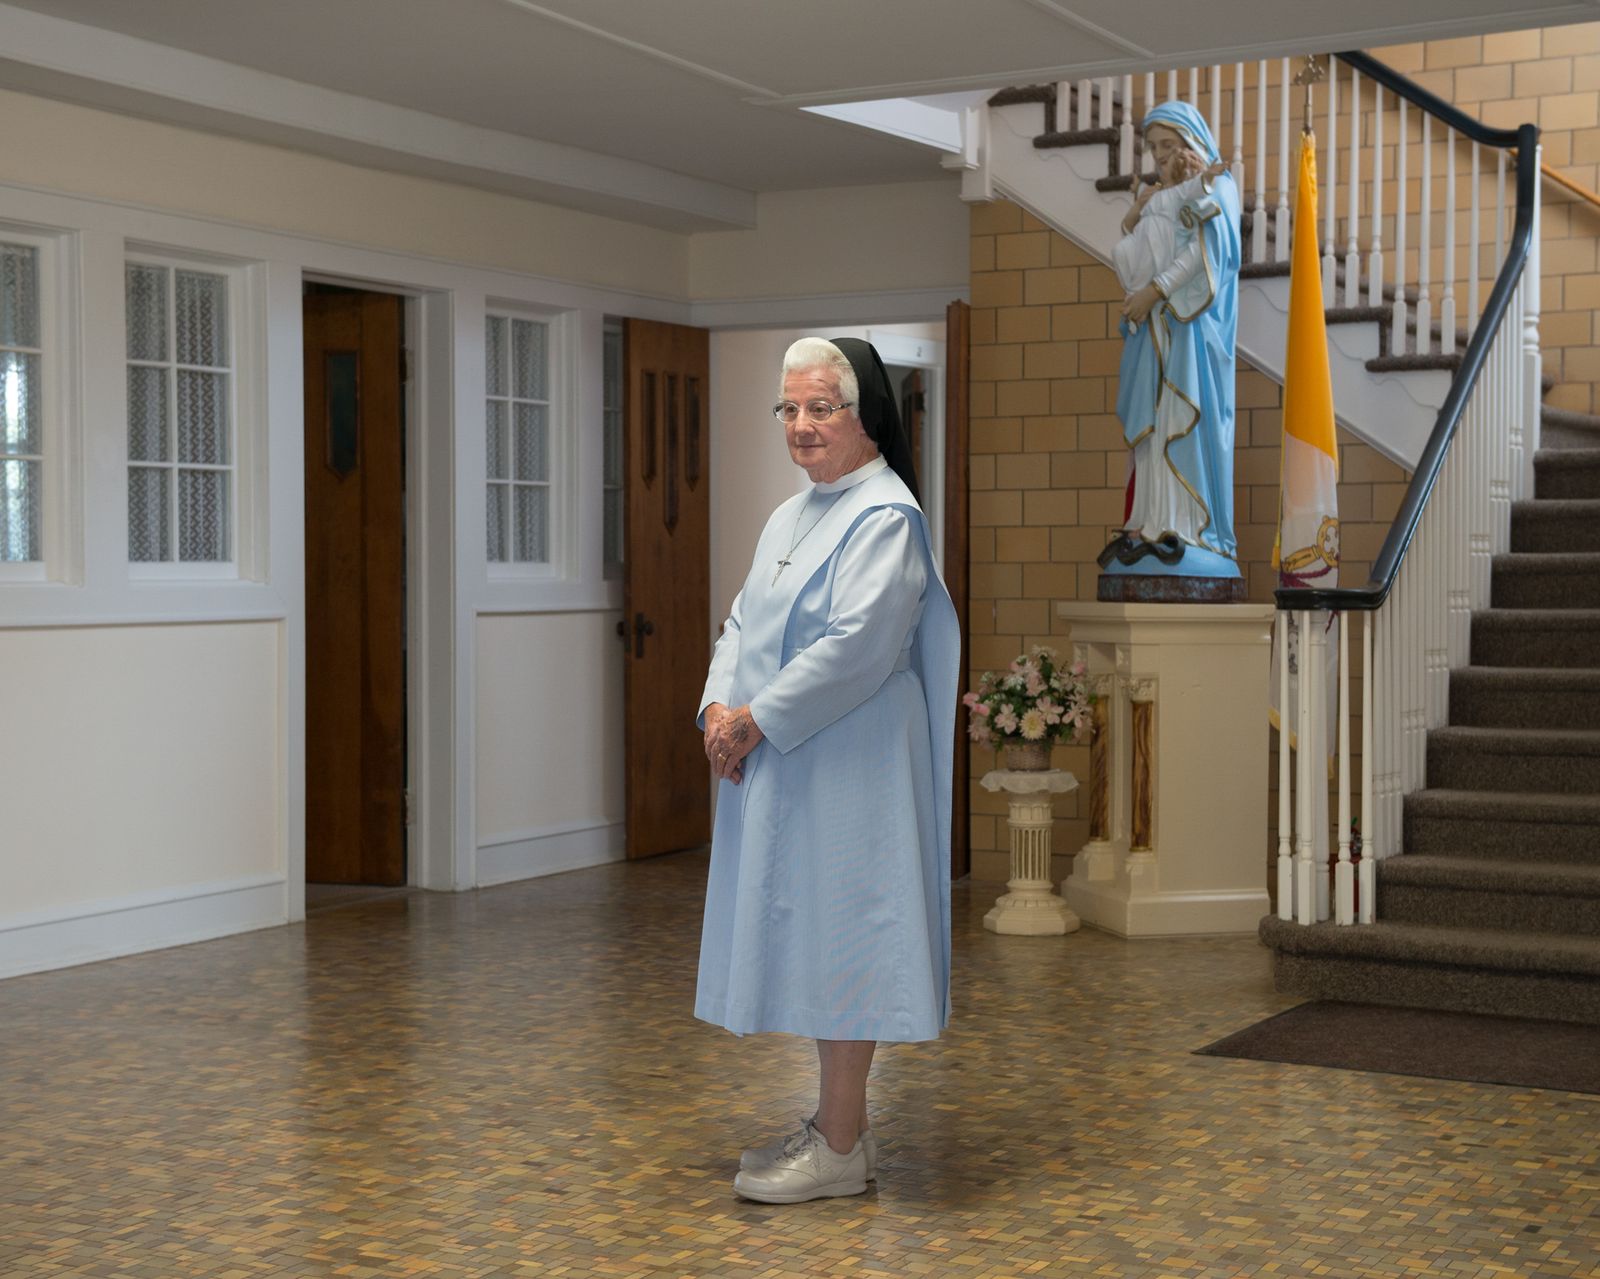 © Martin Toft - Sister James Dolores, Villa Maria by the Sea Convent, Stone Harbor, New Jersey, United States, 13 Aug 2014.